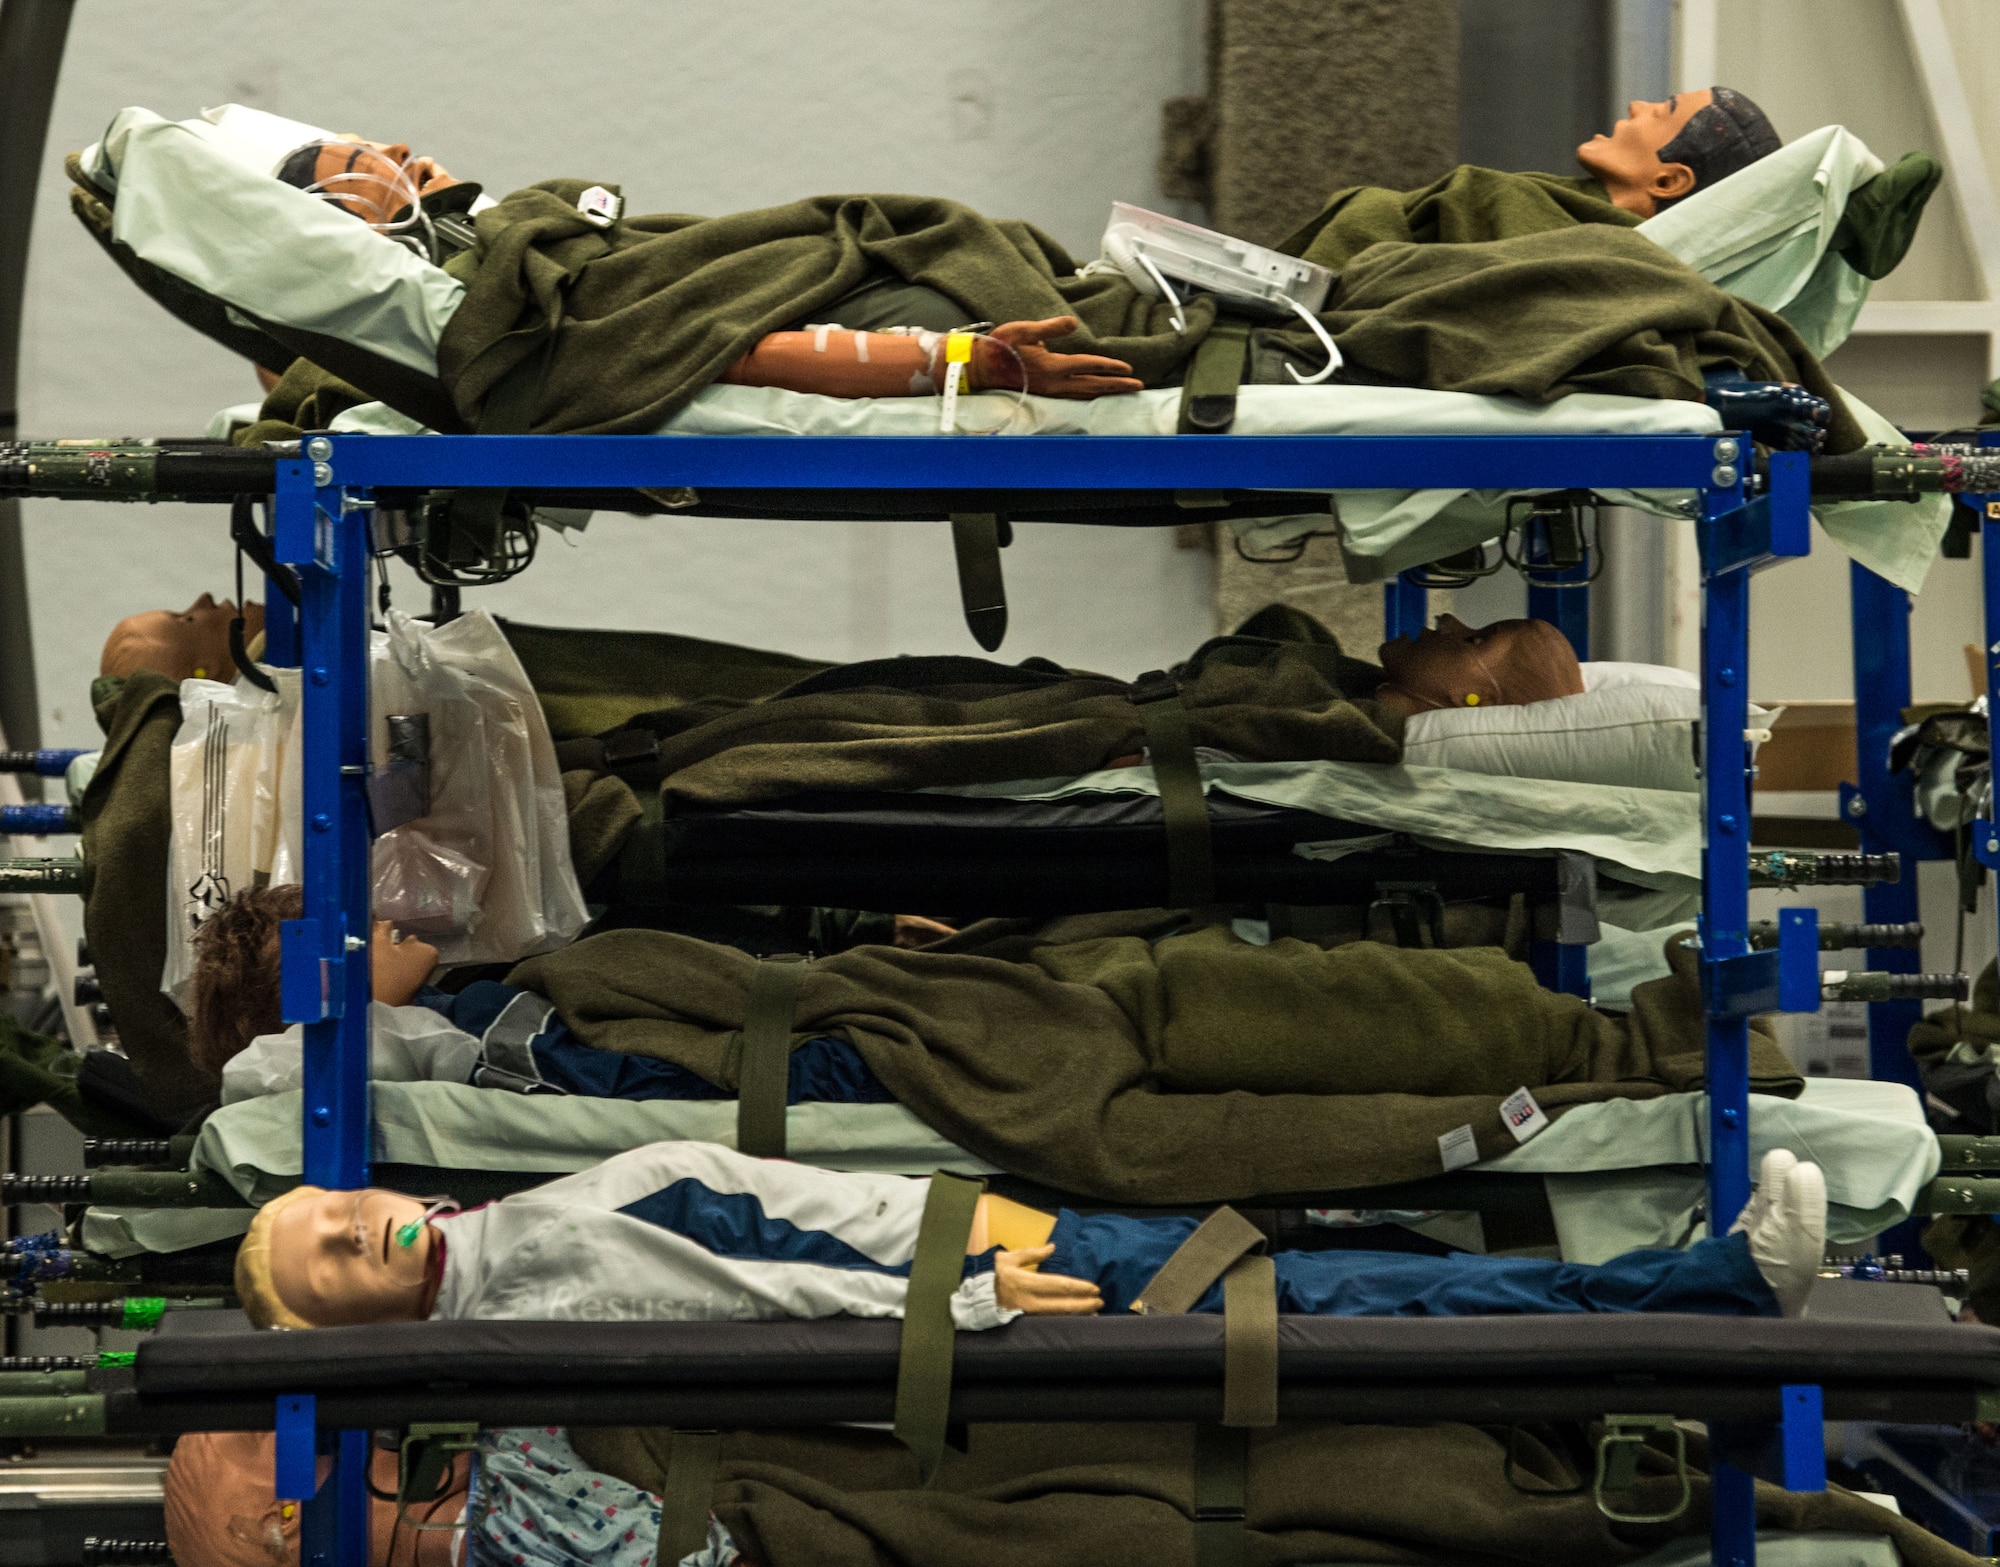 Patient simulators used in the aeromedical evacuation training of active-duty, reserve and ANG Airmen, as well as, members of other services and partner nations, aboard a C-130 mockup during the Flight Nurse and Aeromedical Technician Course, await use on racks in the high bay area or the 711th Human Performance Wing's U.S. Air Force School of Aerospace Medicine at Wright Patterson AFB, Ohio, Jan. 29, 2018. (U.S. Air Force photo by J.M. Eddins Jr.)